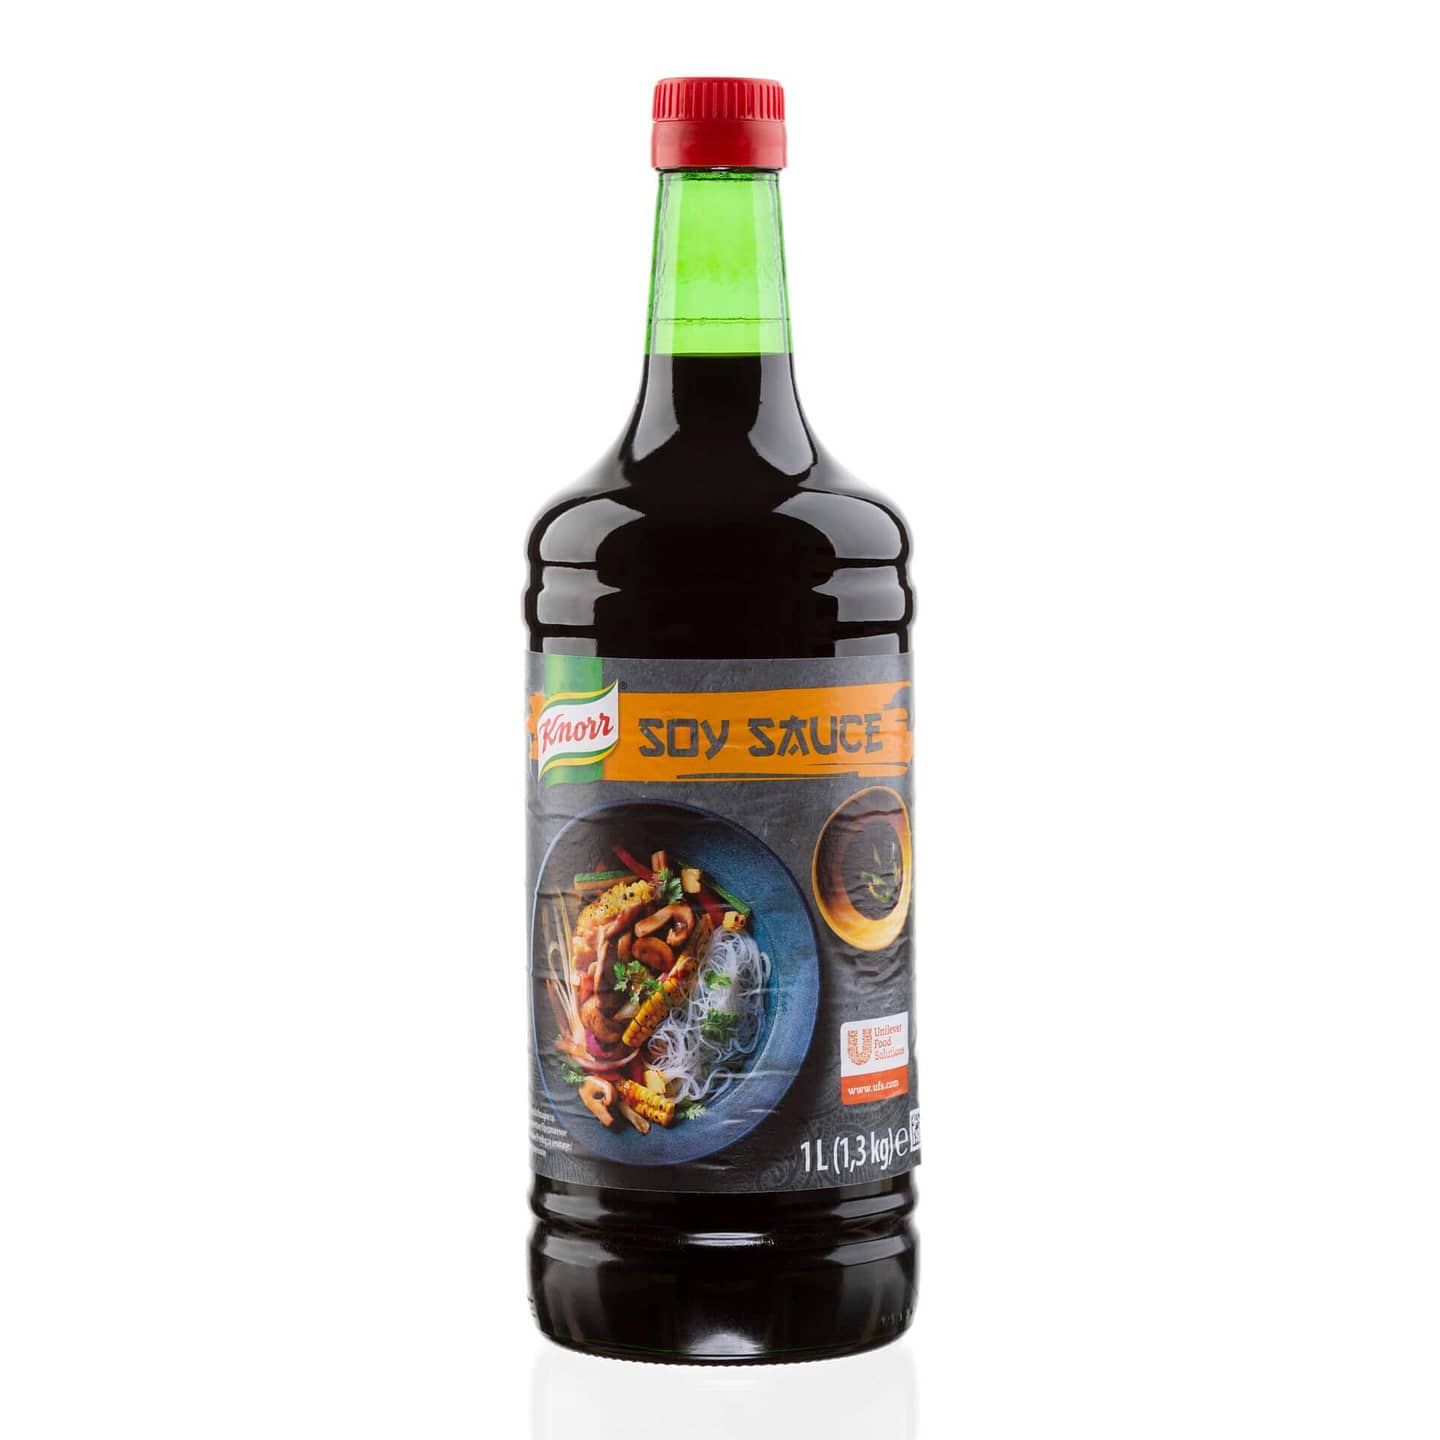 KNORR soy sauce